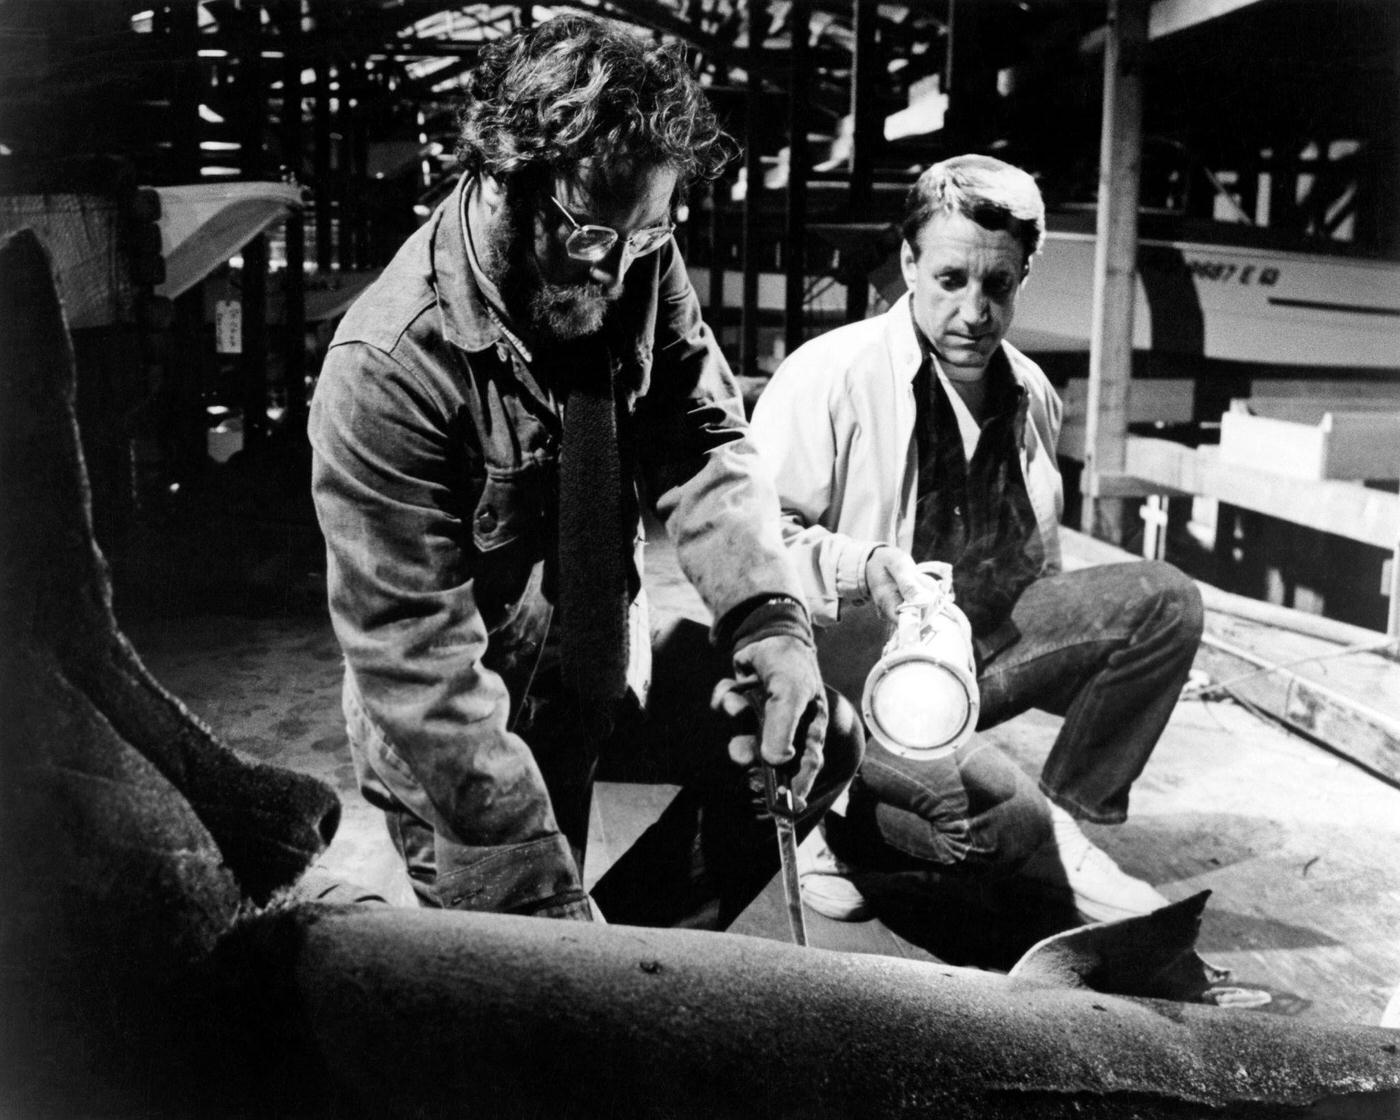 Police chief Martin Brody, played by Roy Scheider (1932 - 2008) holds a torch while marine biologist Matt Hooper (Richard Dreyfuss) cuts open the stomach of a recently caught tiger shark, in 'Jaws', 1975